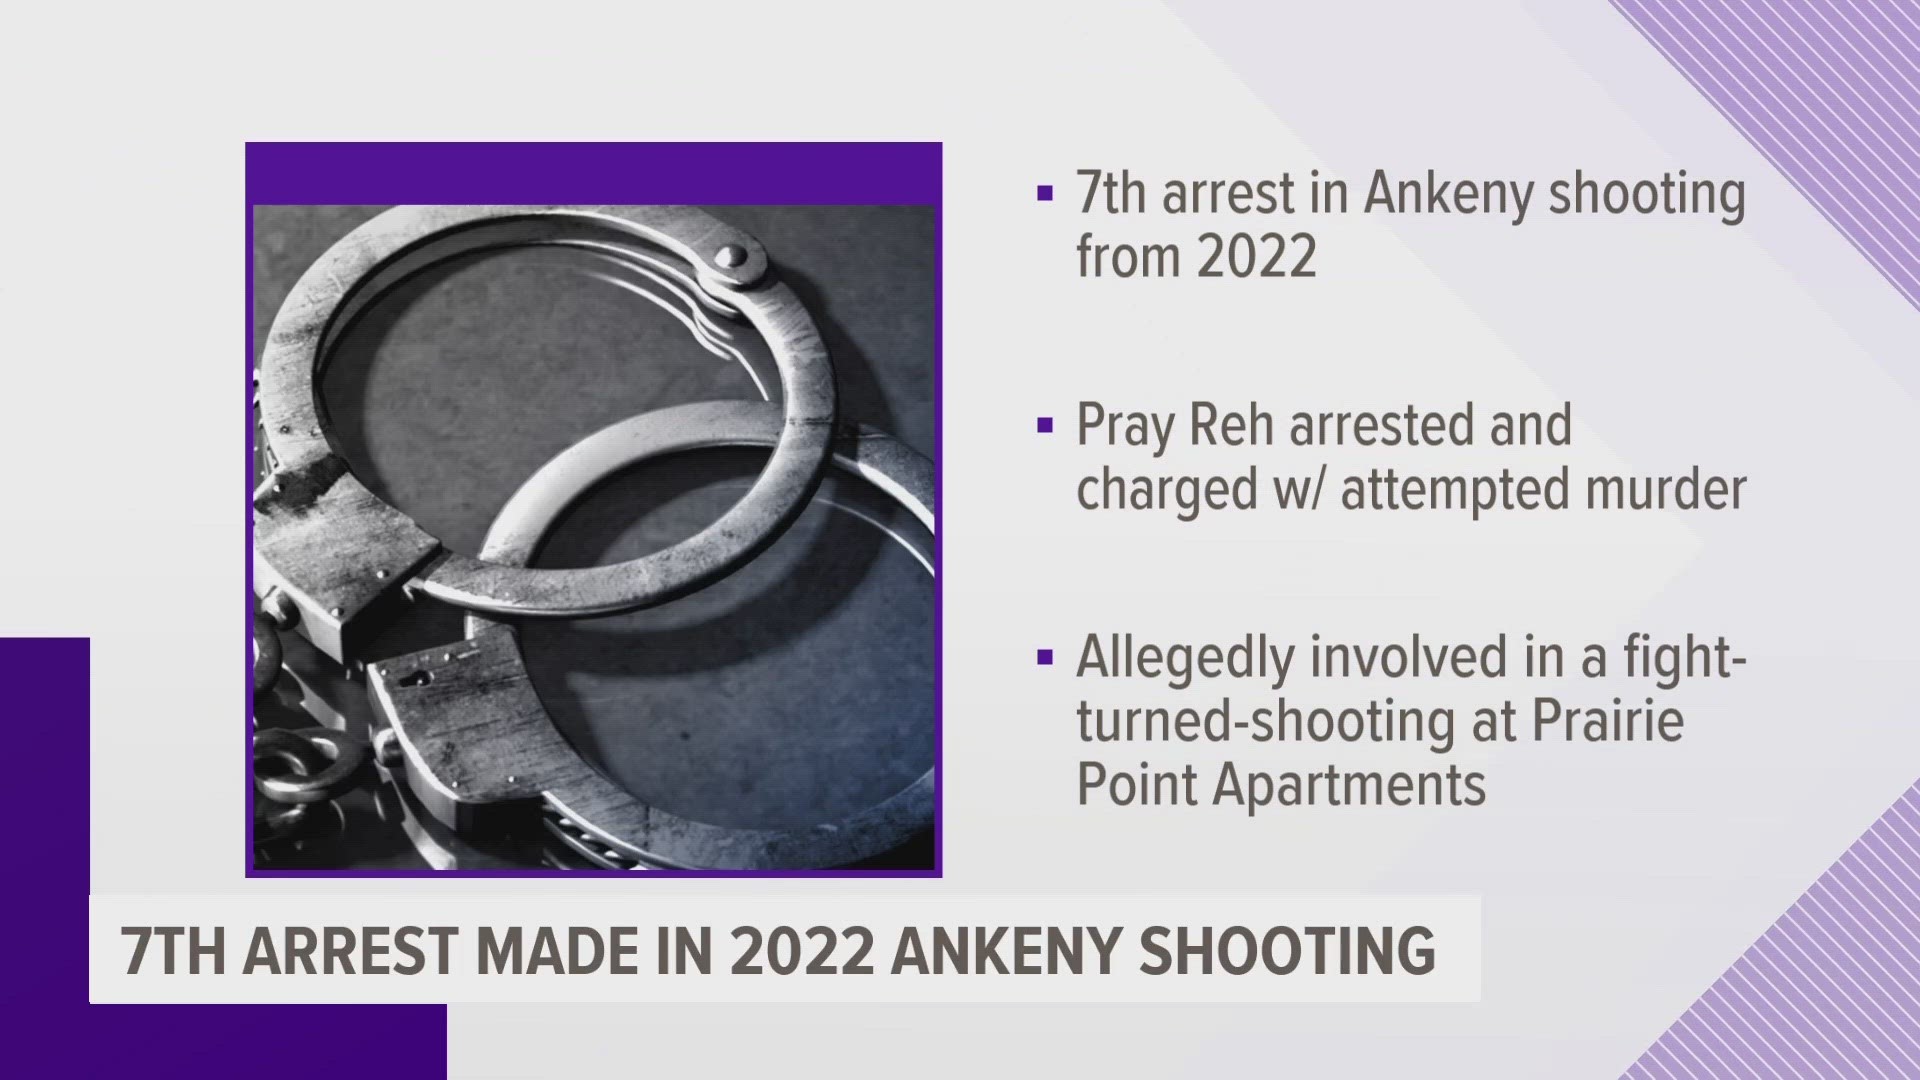 18-year-old Pray Reh is one of the teens who were allegedly involved in a fight-turned-shooting that led to a shootout with the Ankeny police in February 2022.